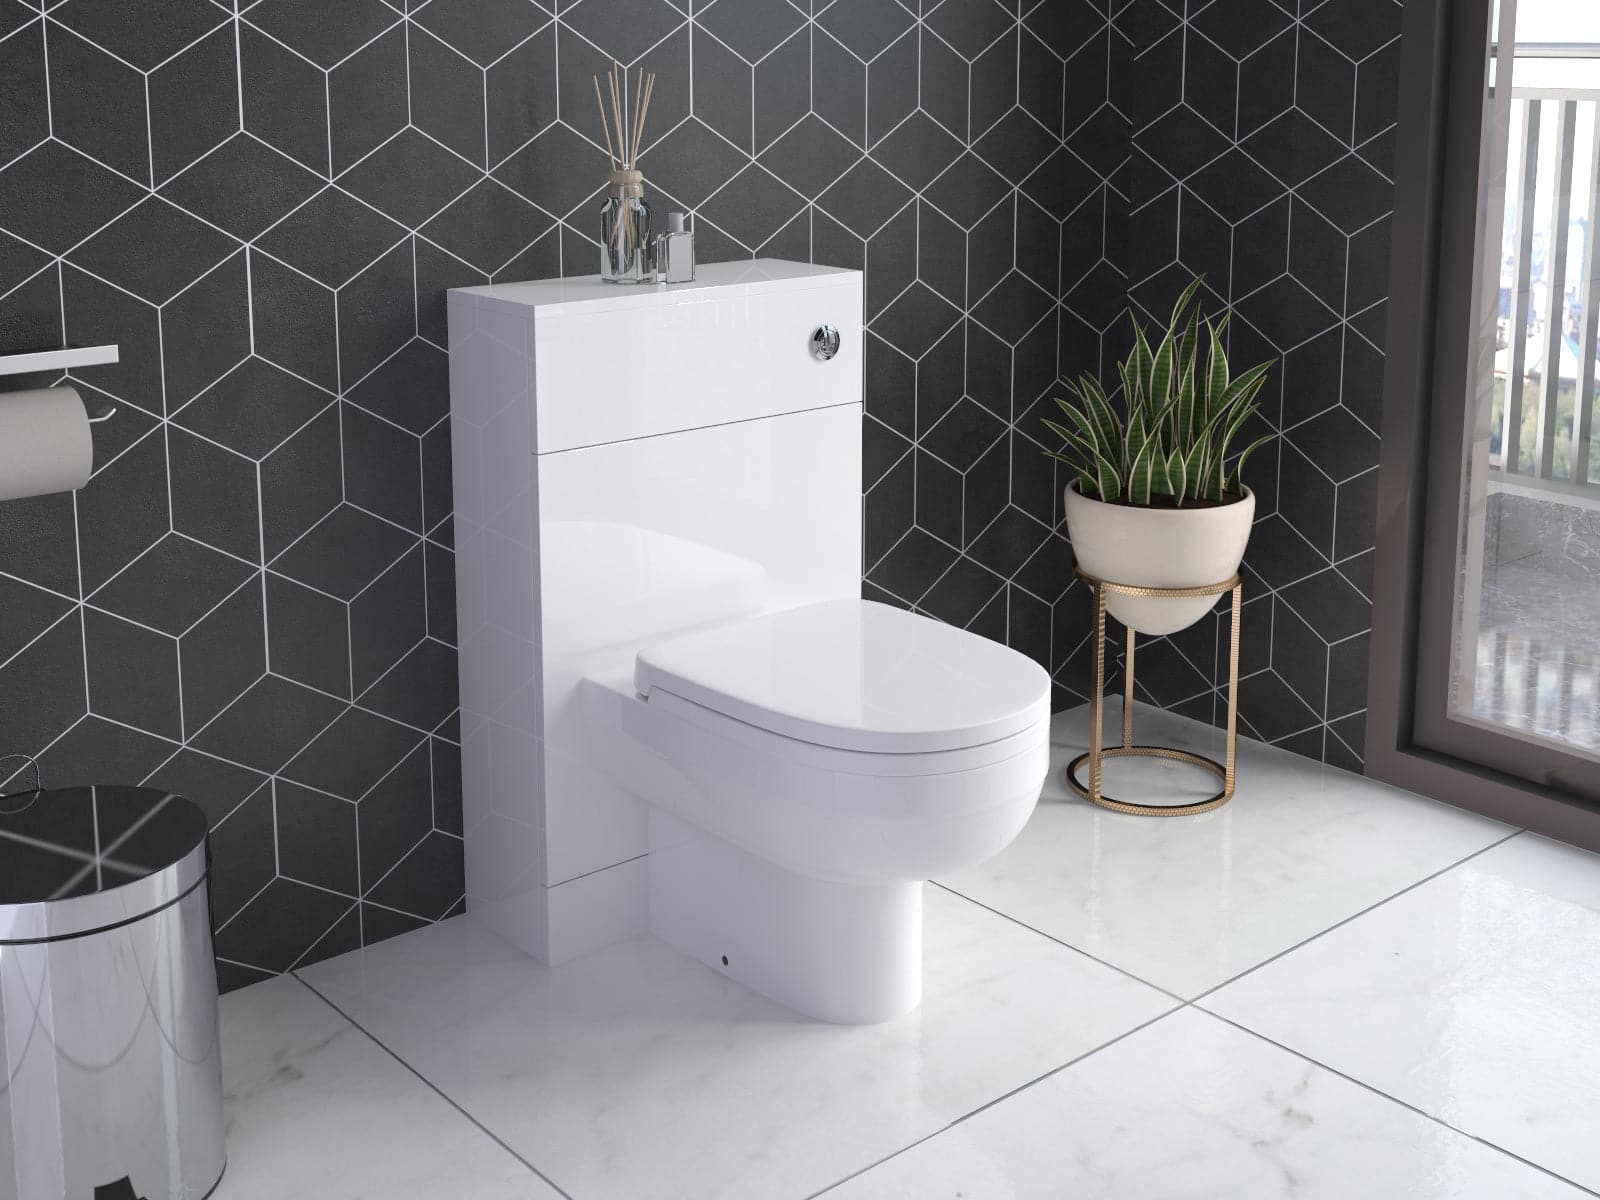 Gamma L Shape Vanity & WC Unit with Toilet - RH - Gloss White. Sleek, space-saving bathroom suite featuring a modern vanity unit and WC. Ideal for contemporary UK bathrooms.